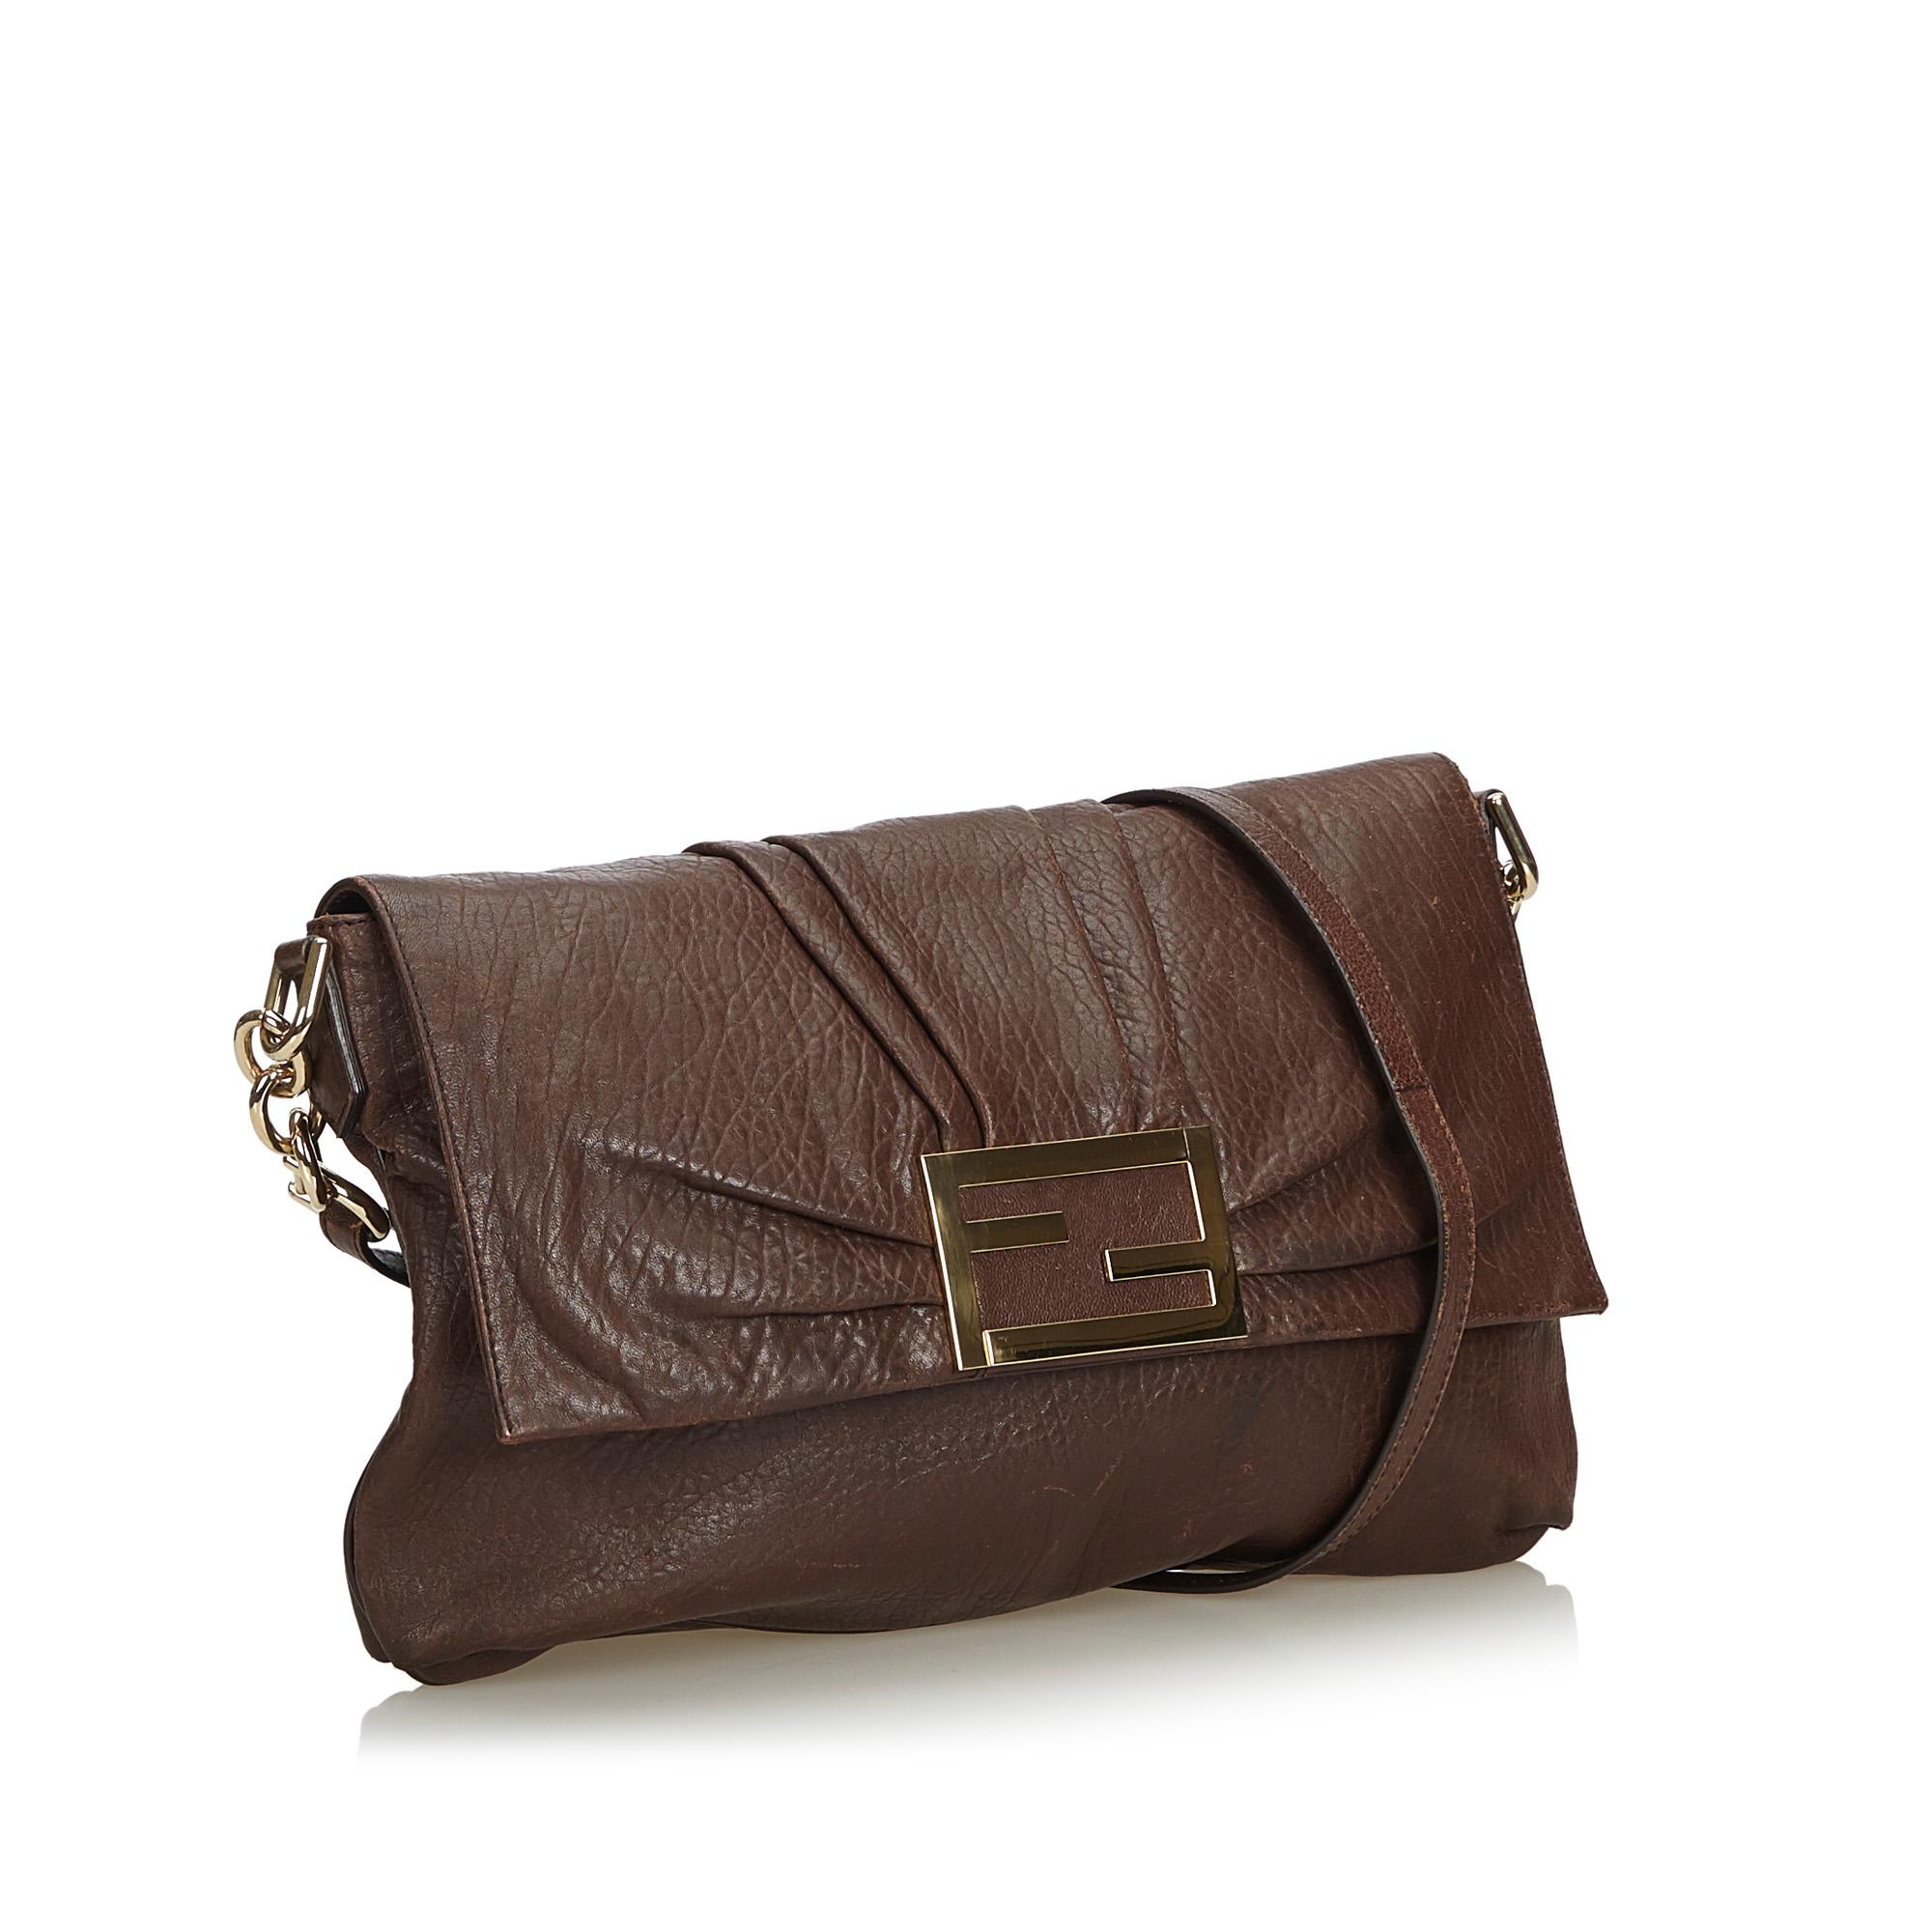 The Mia crossbody bag features a leather body, an adjustable flat strap, a front flap with a magnetic closure, and an interior zip pocket. It carries as B+ condition rating.

Inclusions: 
This item does not come with inclusions.

Dimensions:
Length: